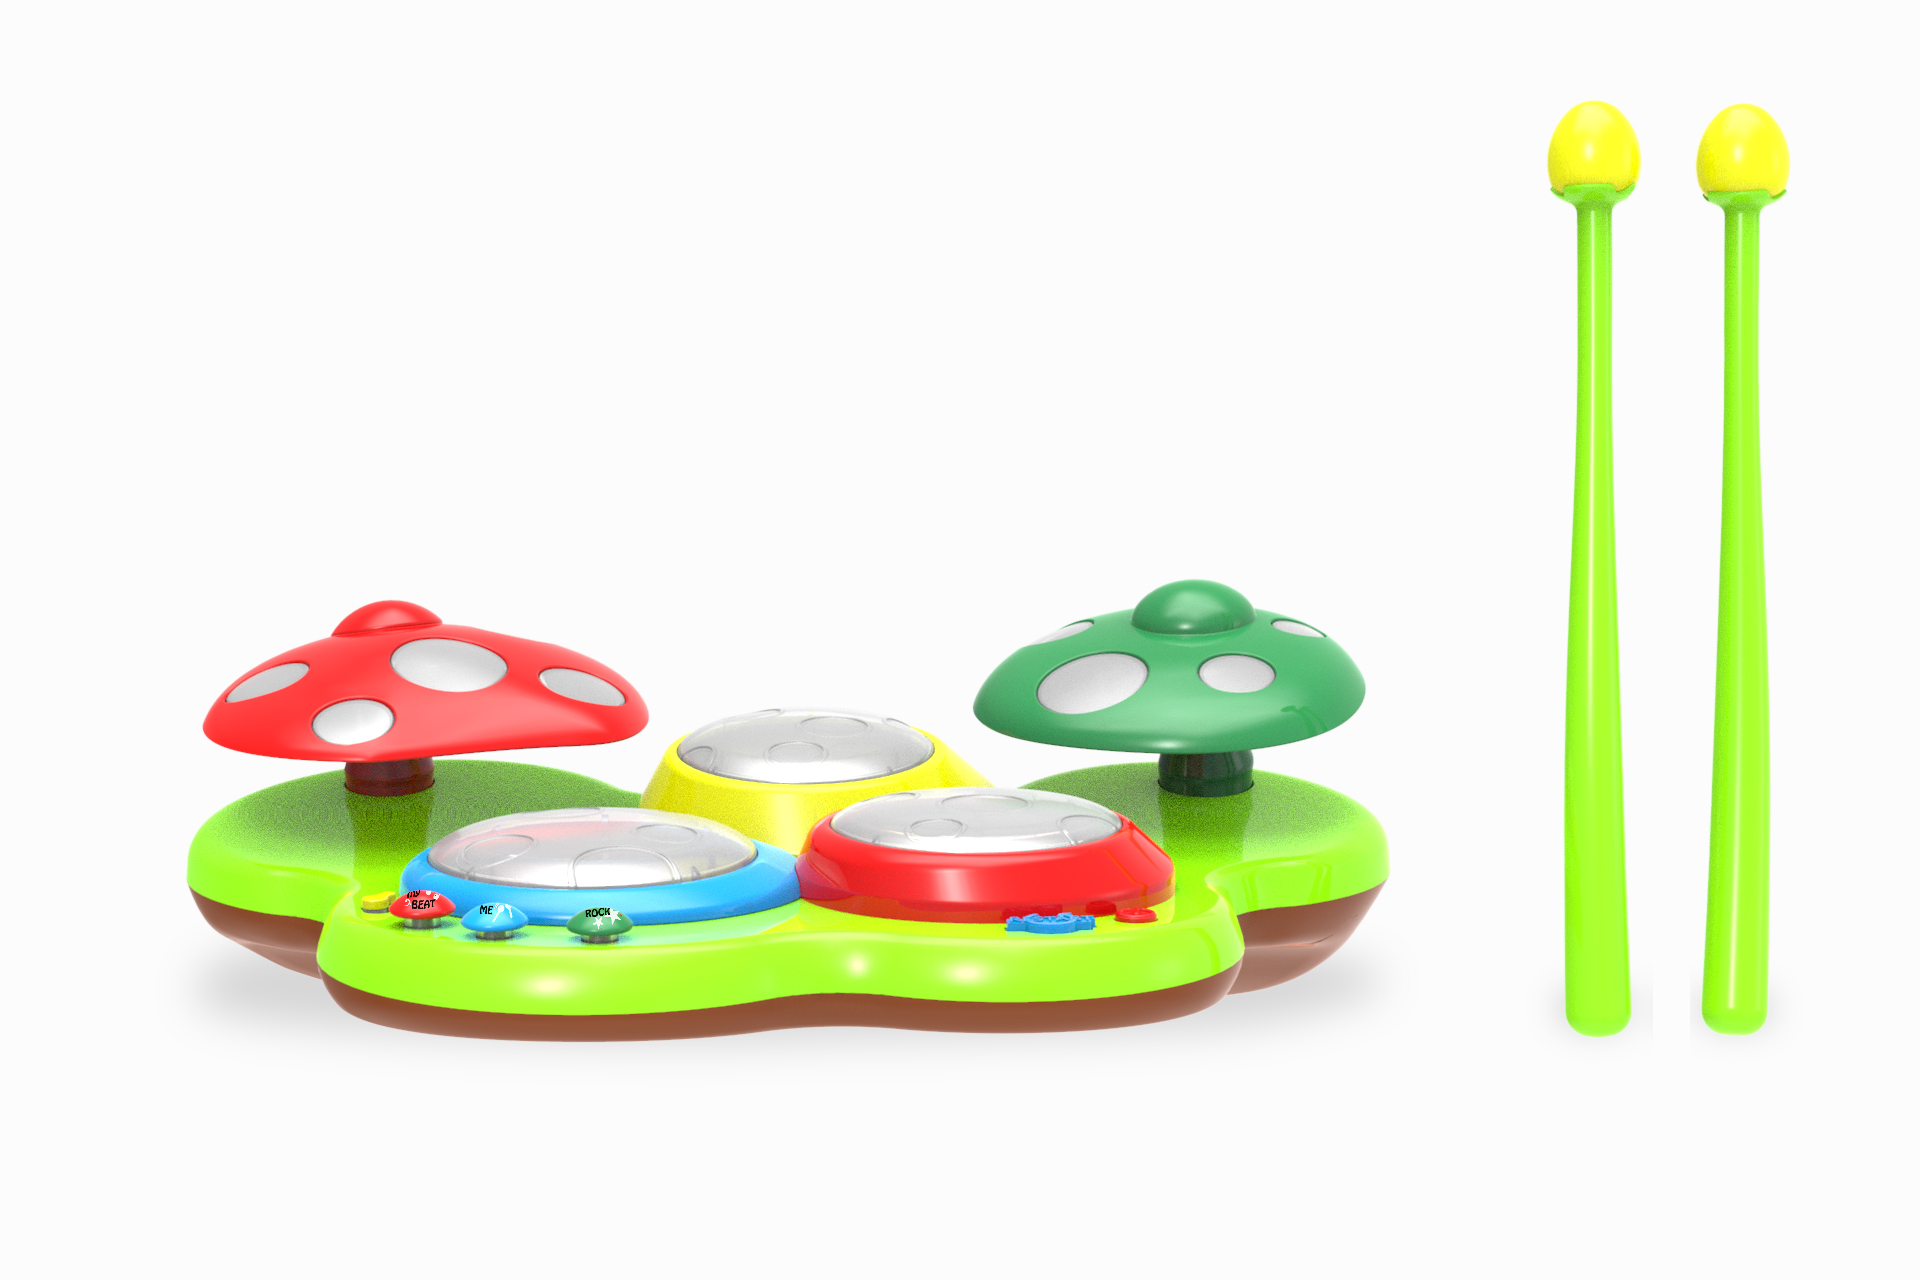 An educational musical drum set for kids